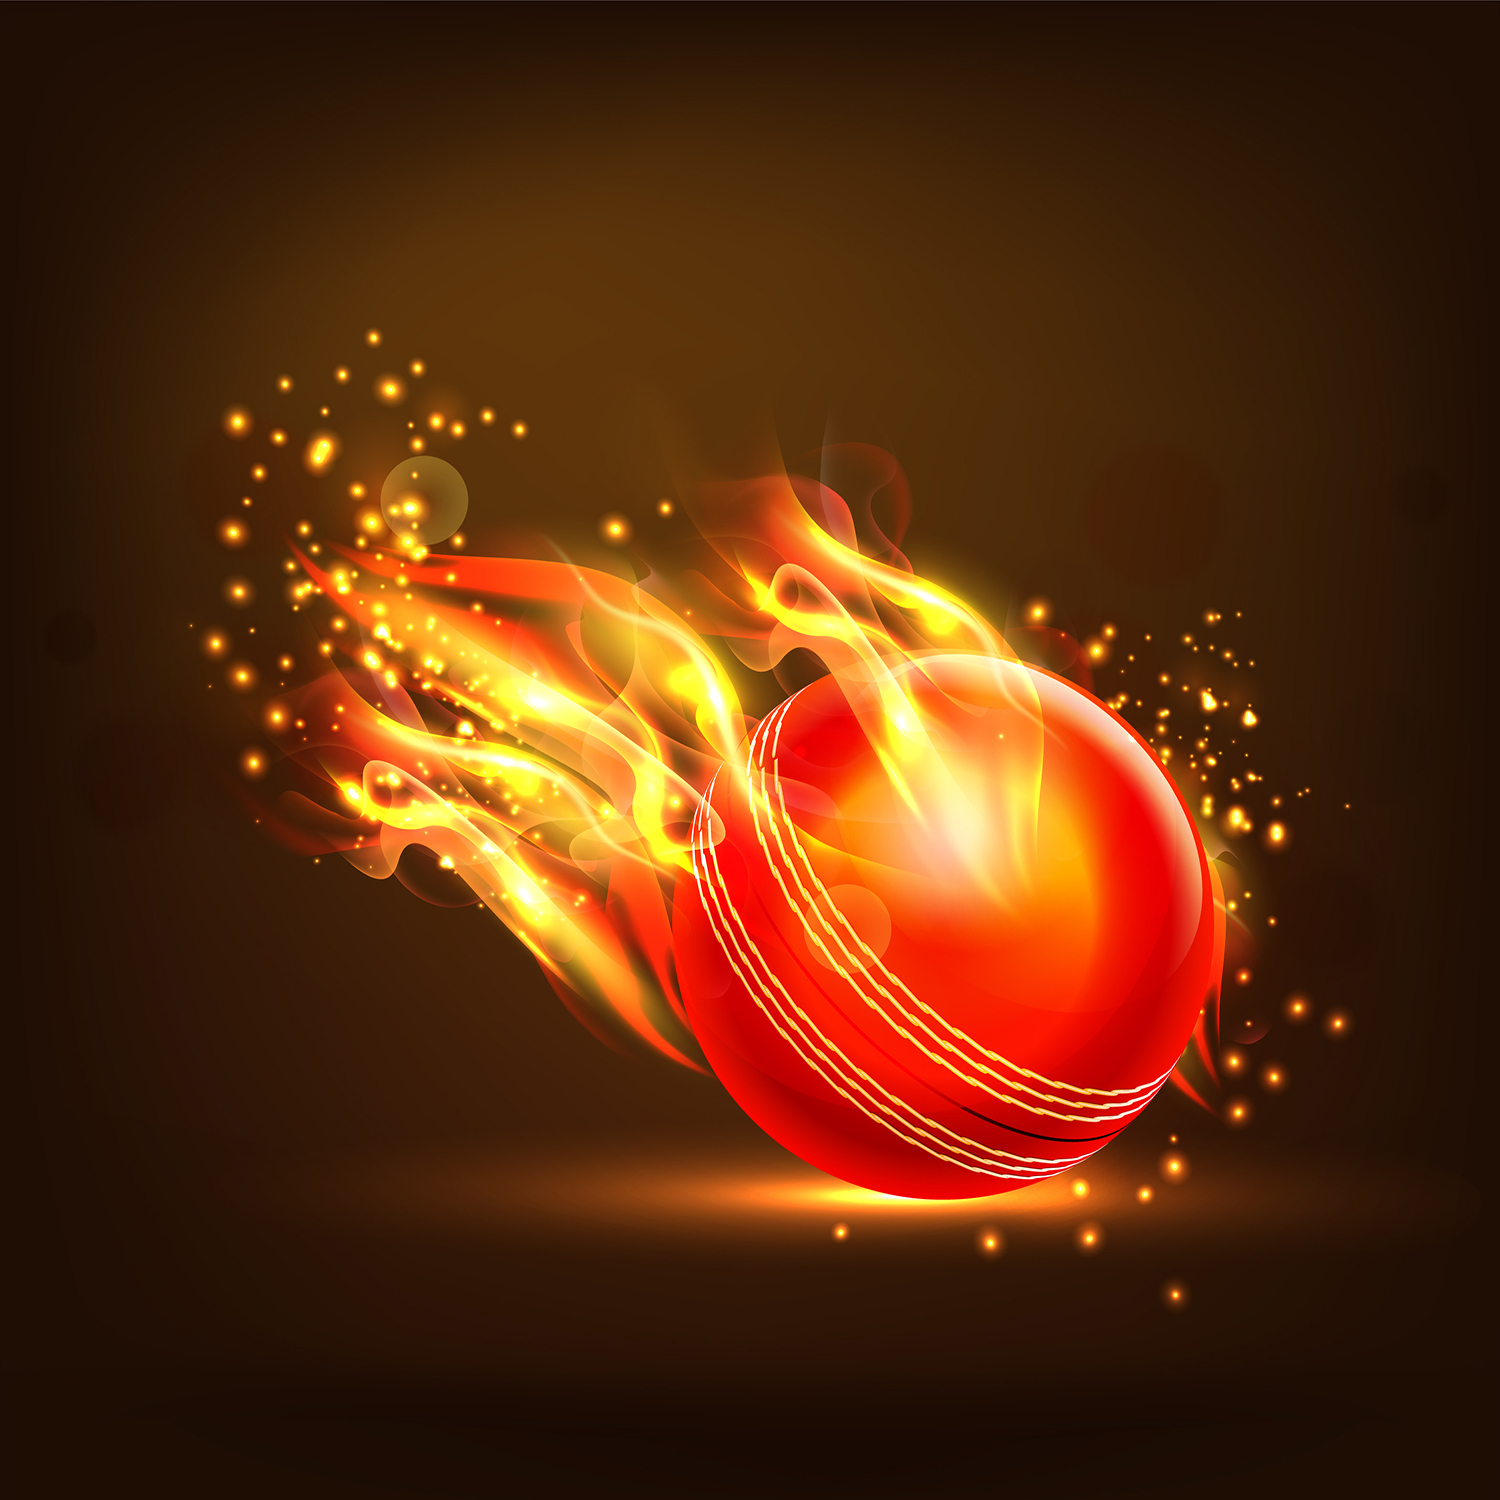 Buy Flaming Cricket Ball Wallpaper Online In India At Best Price